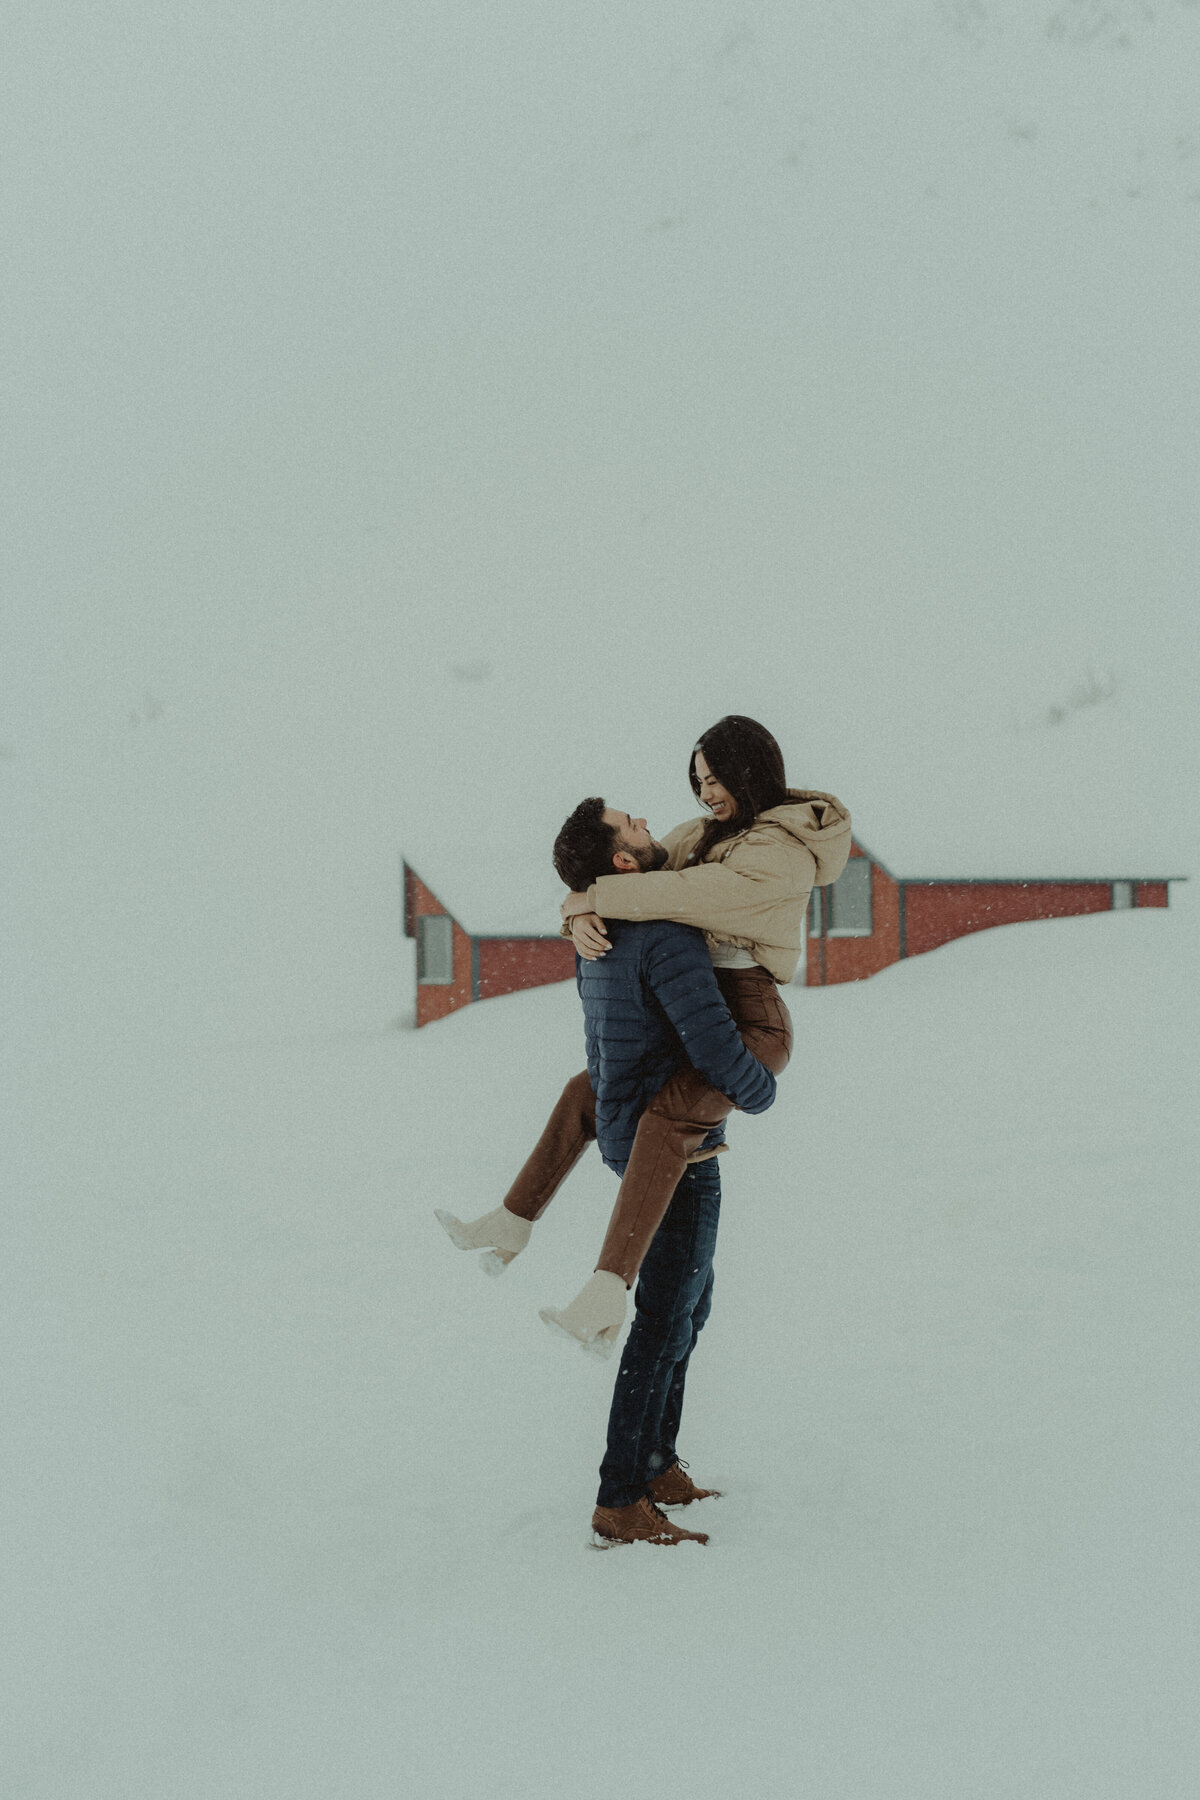 proposal photos in the snow